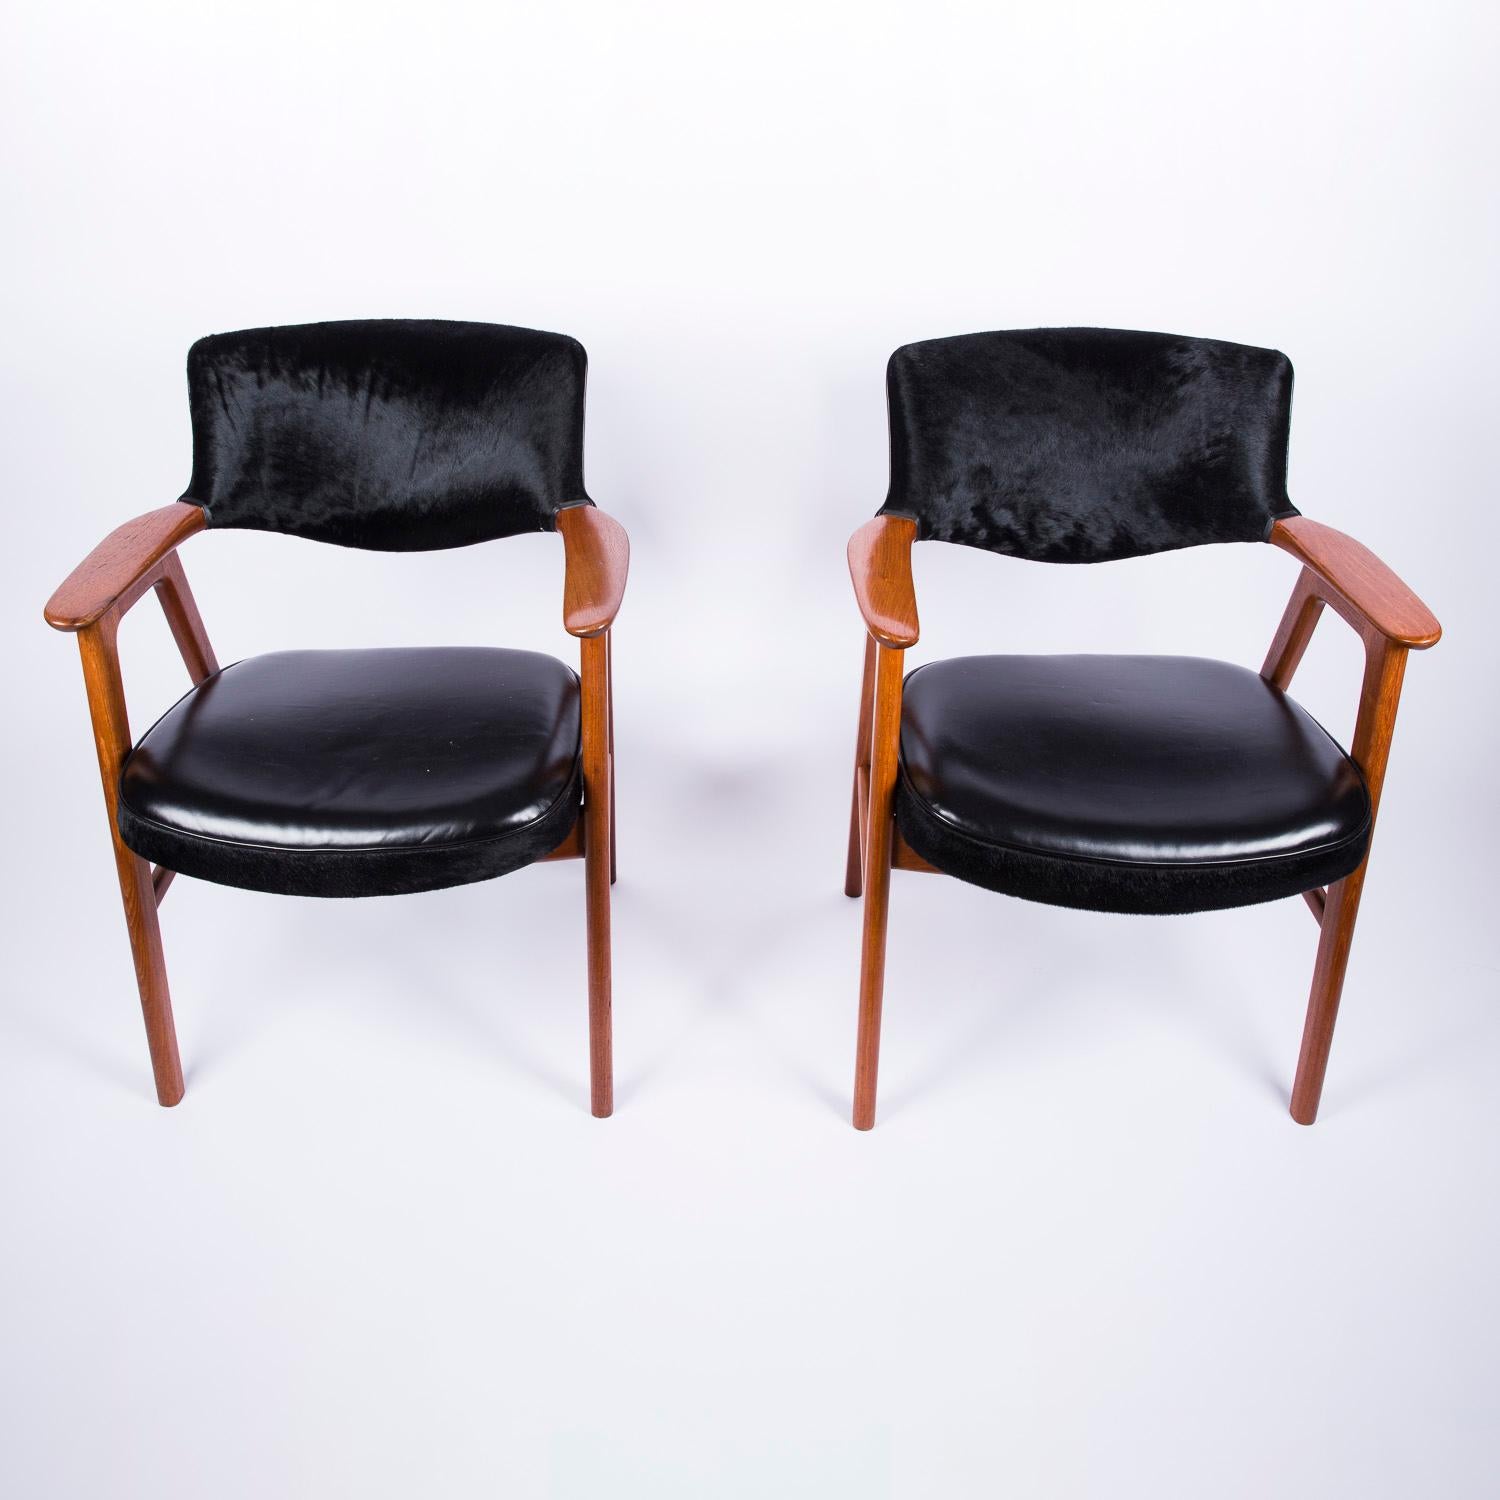 A pair of 1960's armchairs by Erik Kierkegaard for Høng Stolefabrik of Denmark.

Upholstered with black leather seats and faux fur backs.